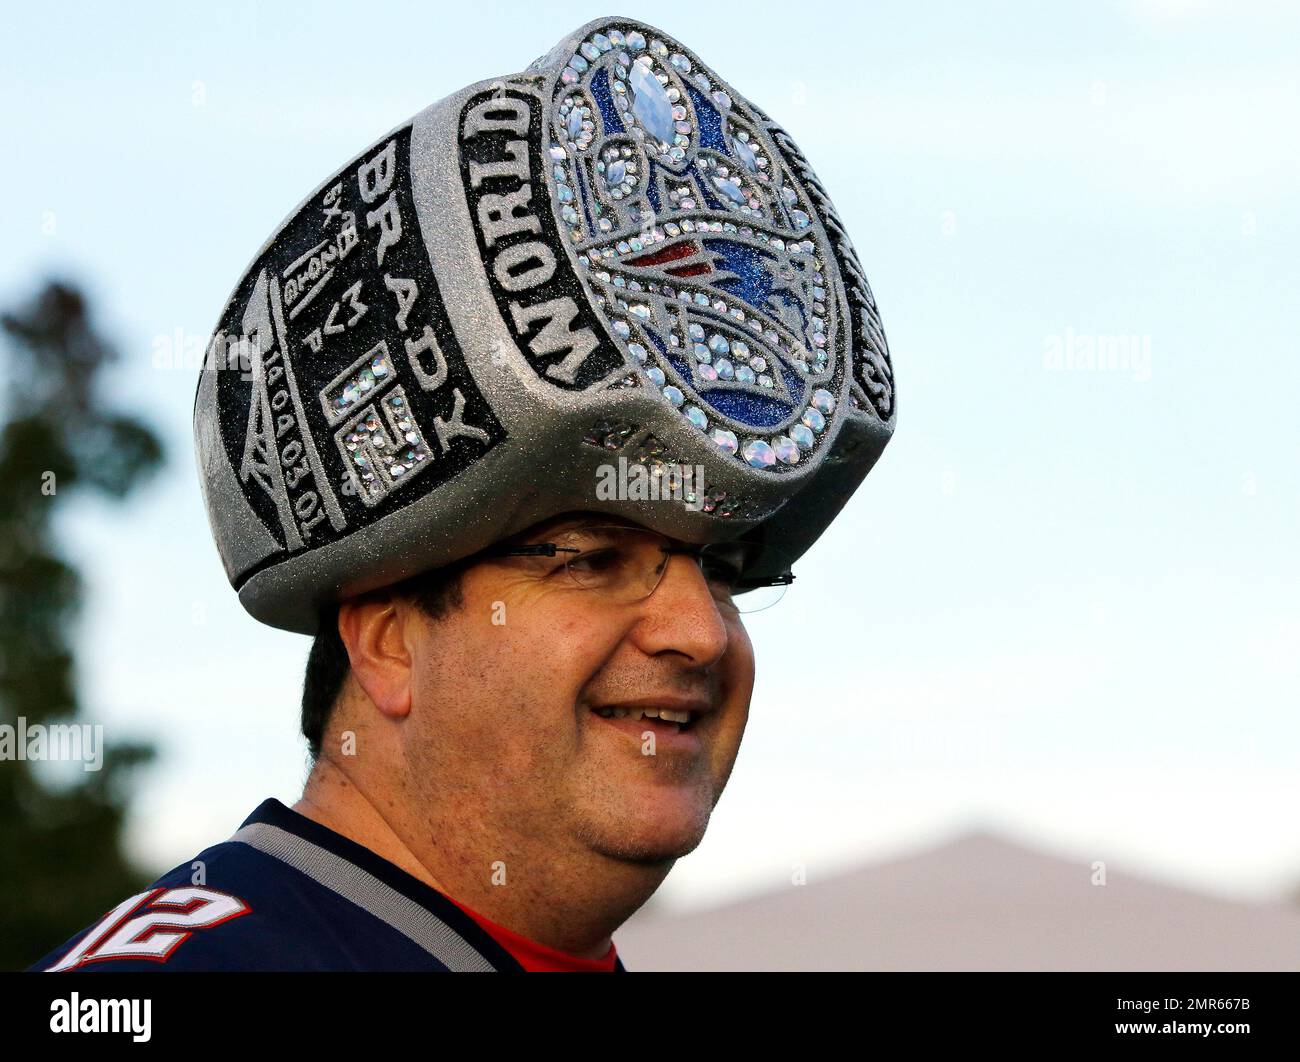 Mark Jawitz, of Andover, Mass., wears an oversized replica of a